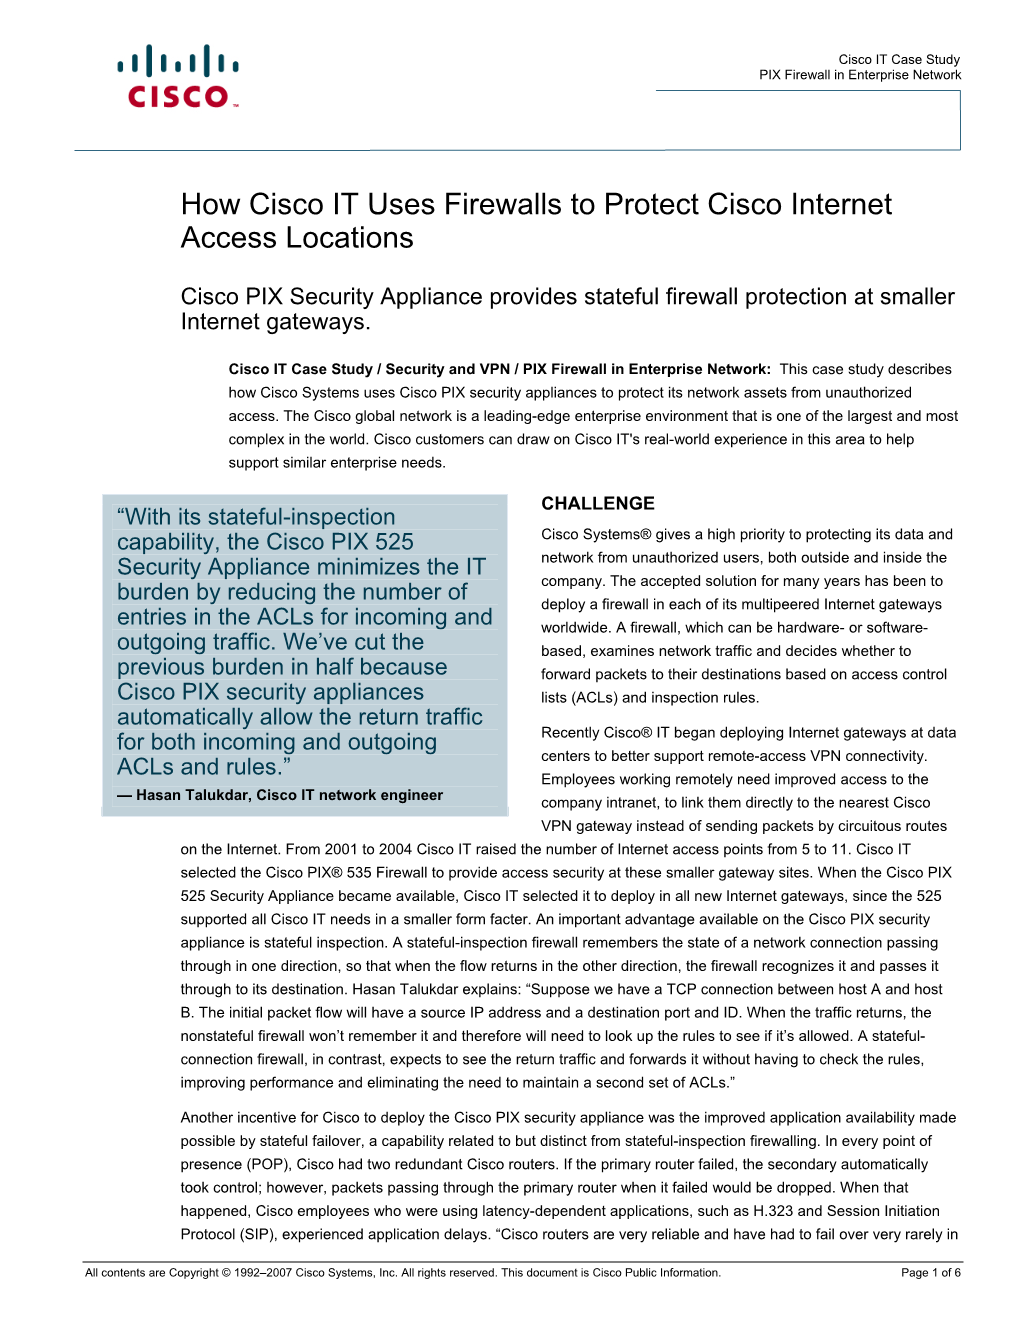 How Cisco IT Uses Firewalls to Protect Cisco Internet Access Locations